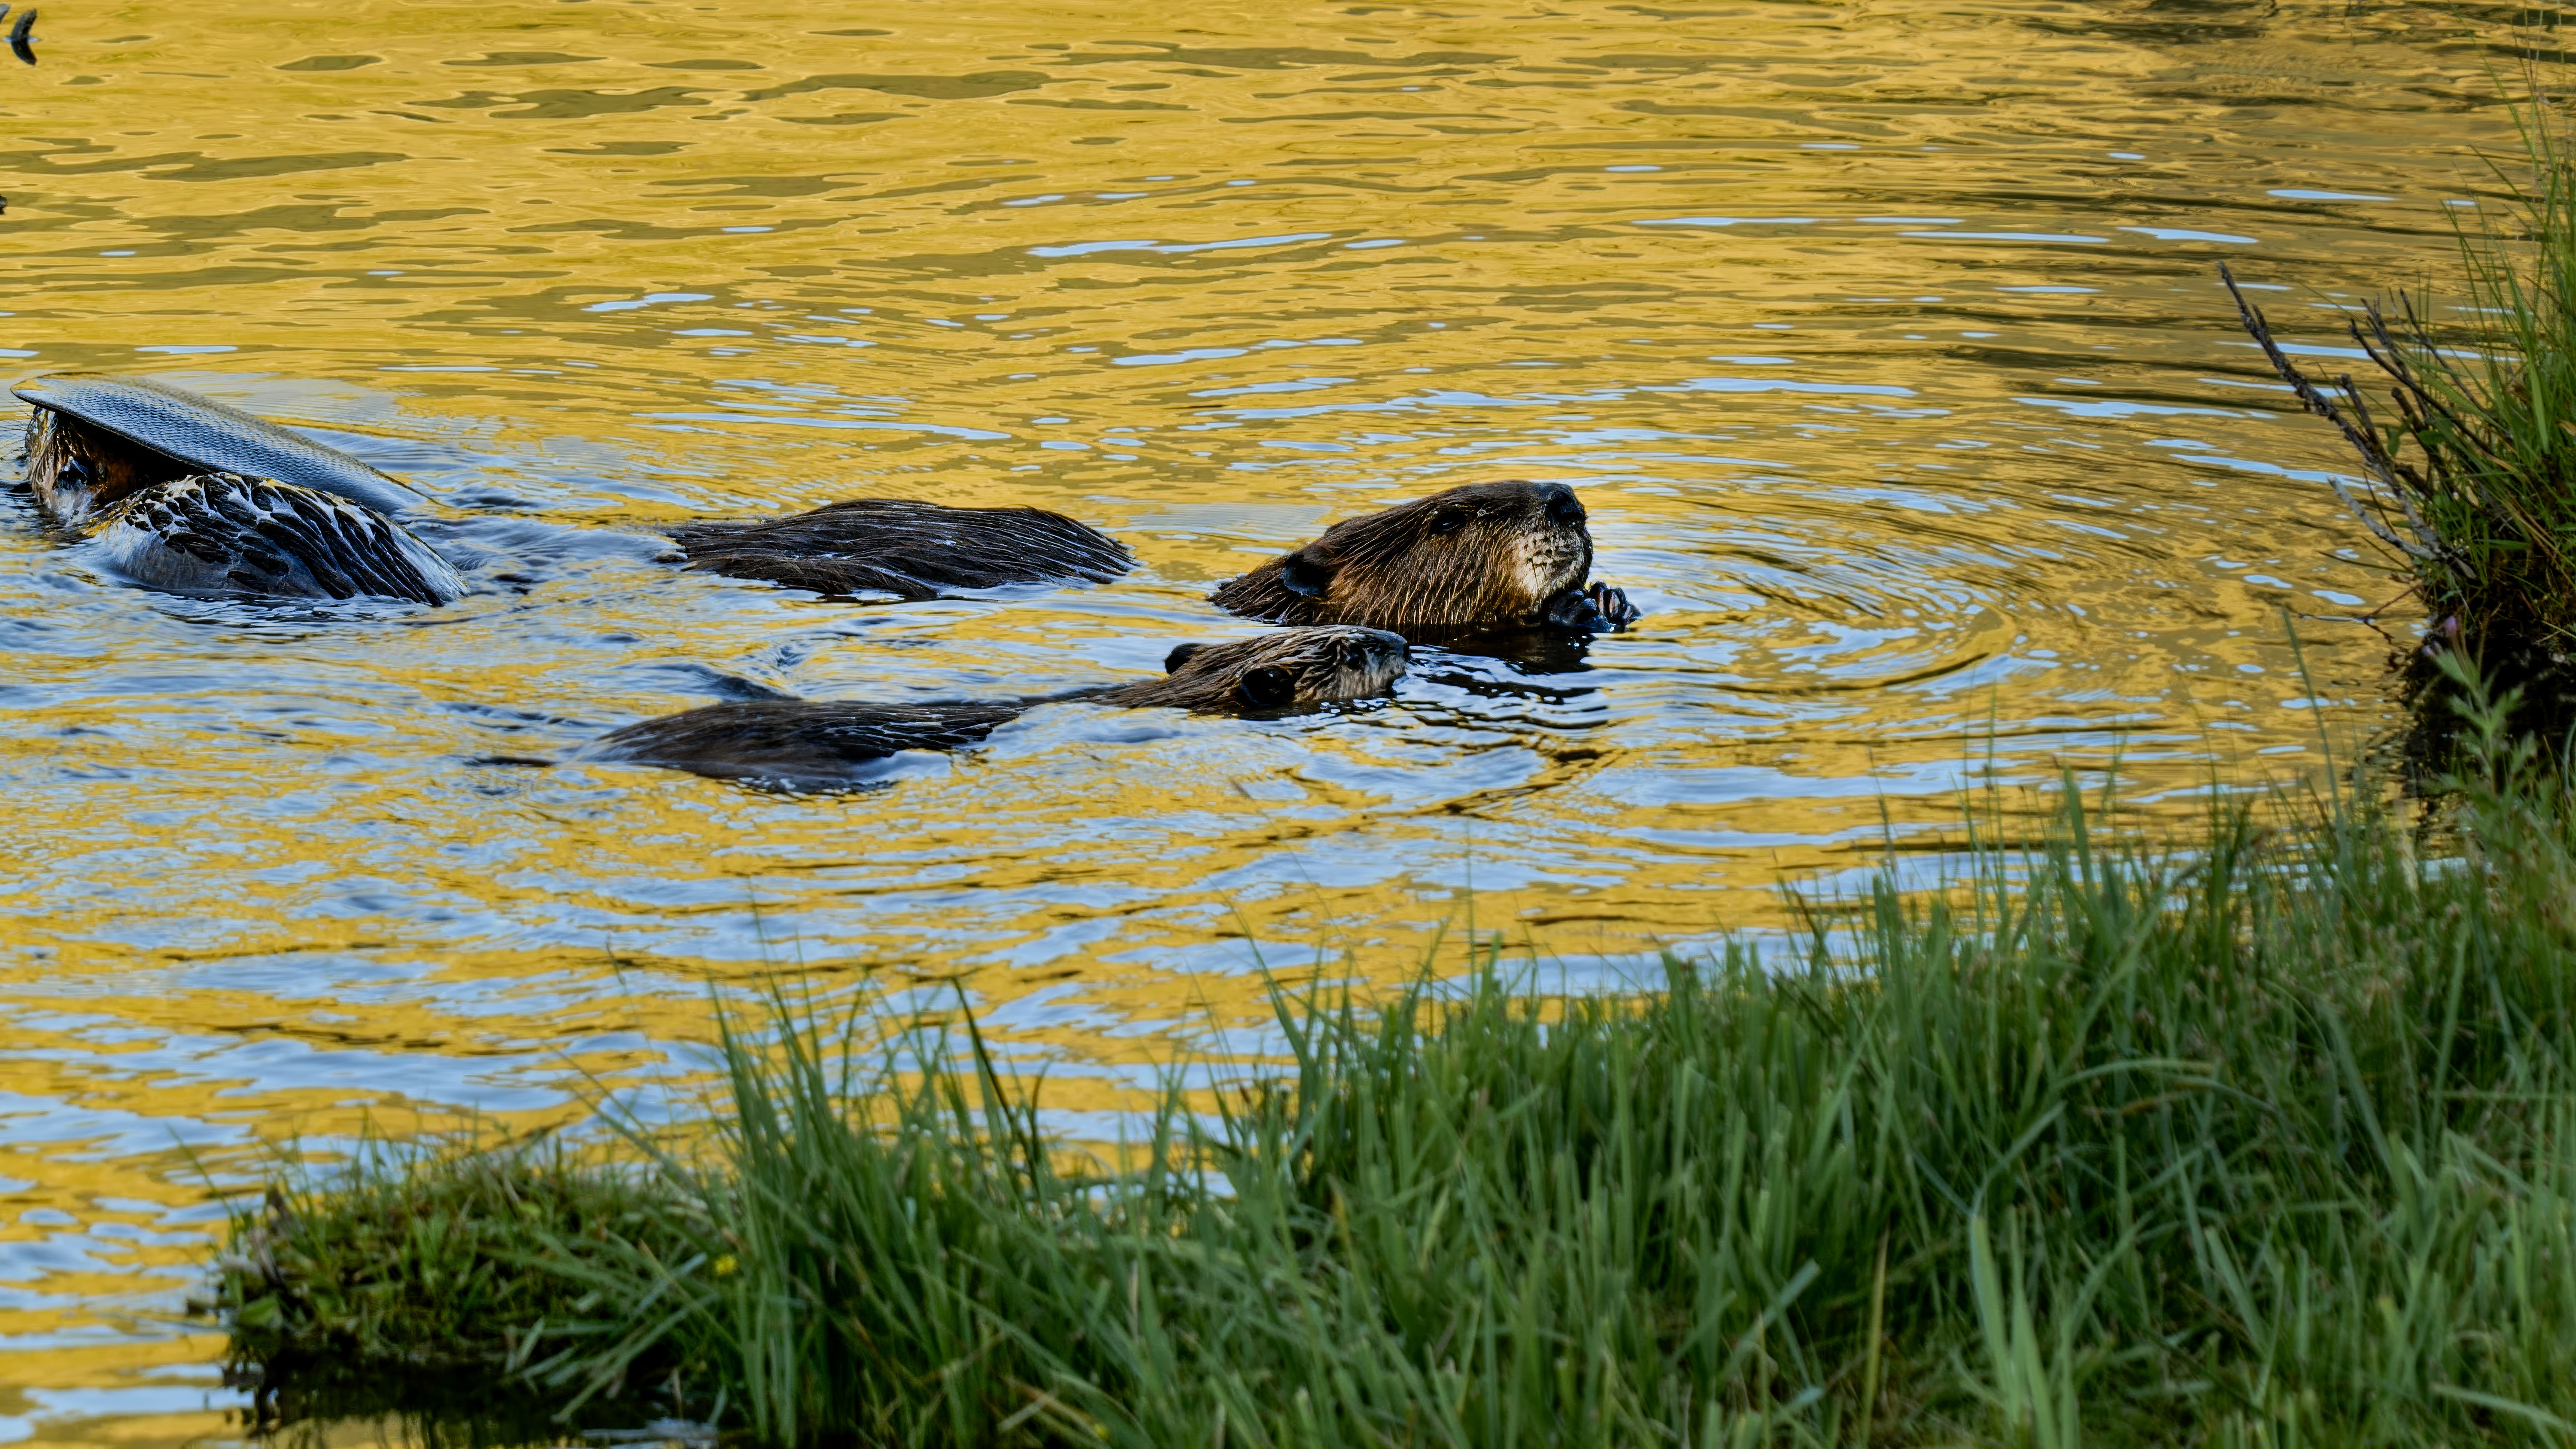 Beavers are helping fight climate change, satellite data shows Space